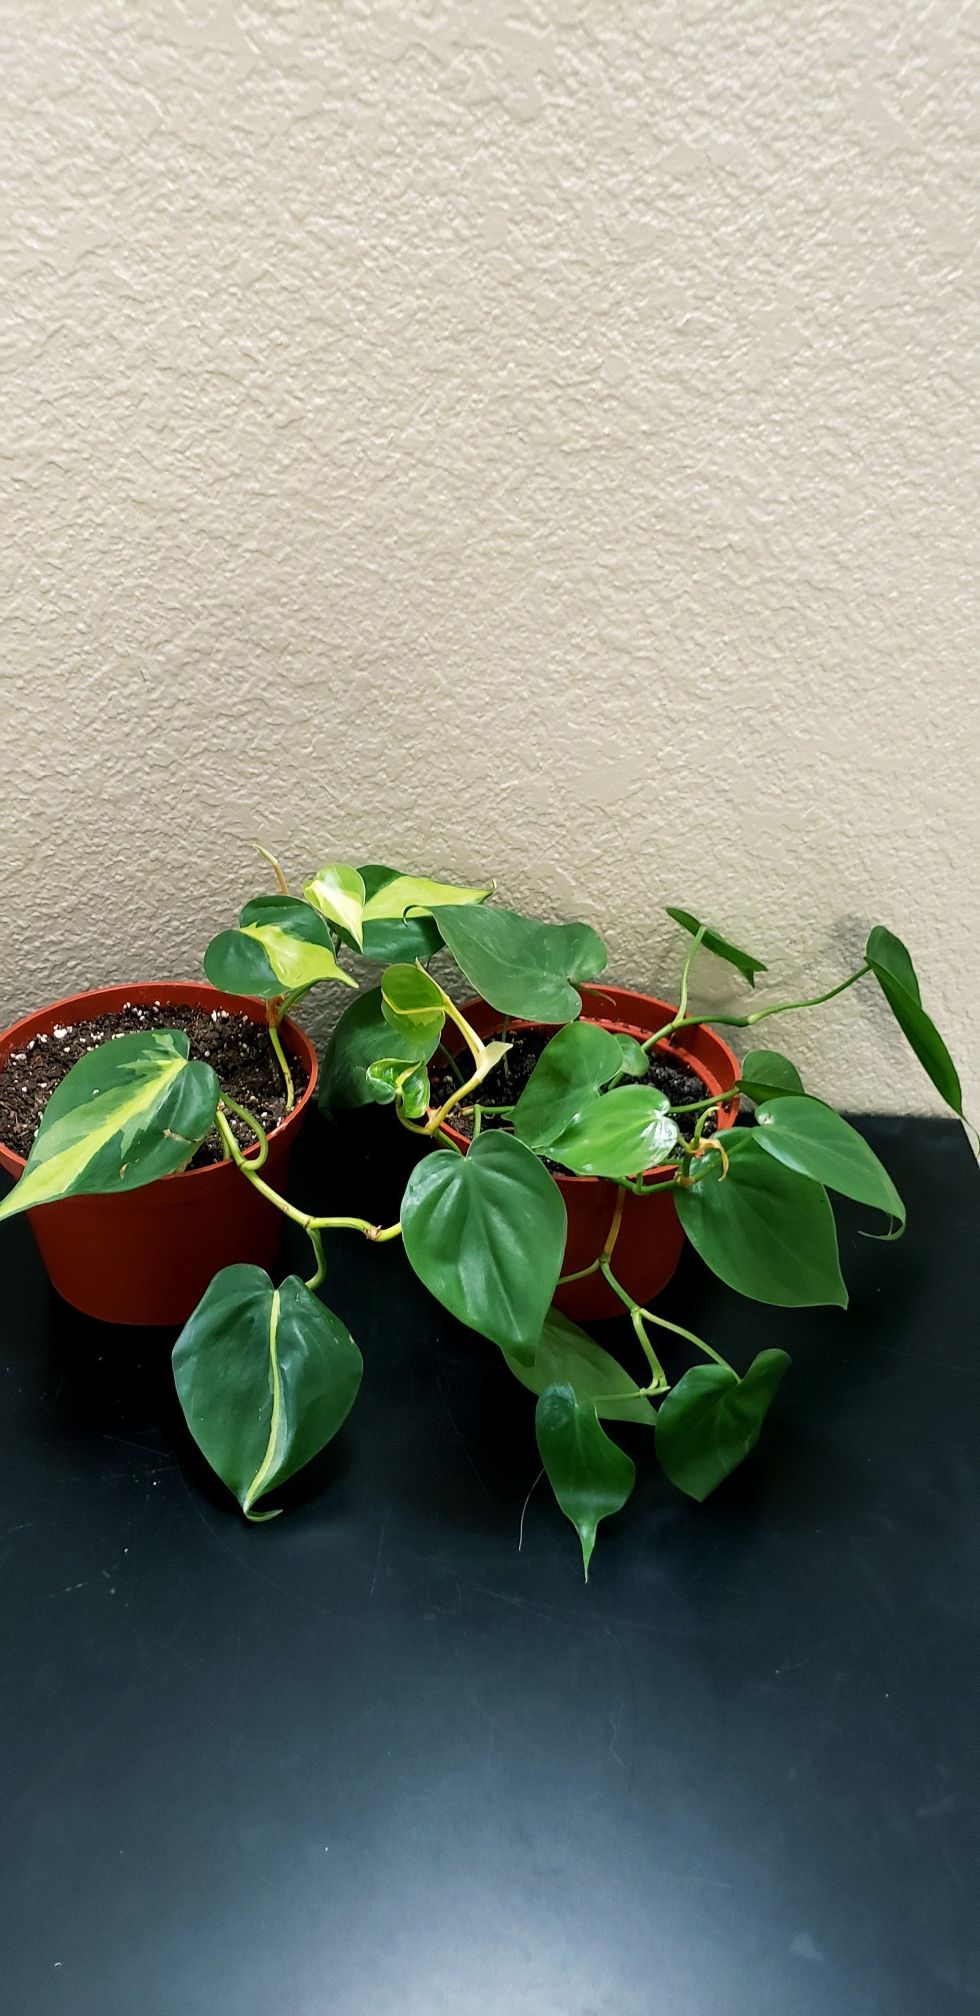 2 live philodendron plants in 6 inch diameter pots